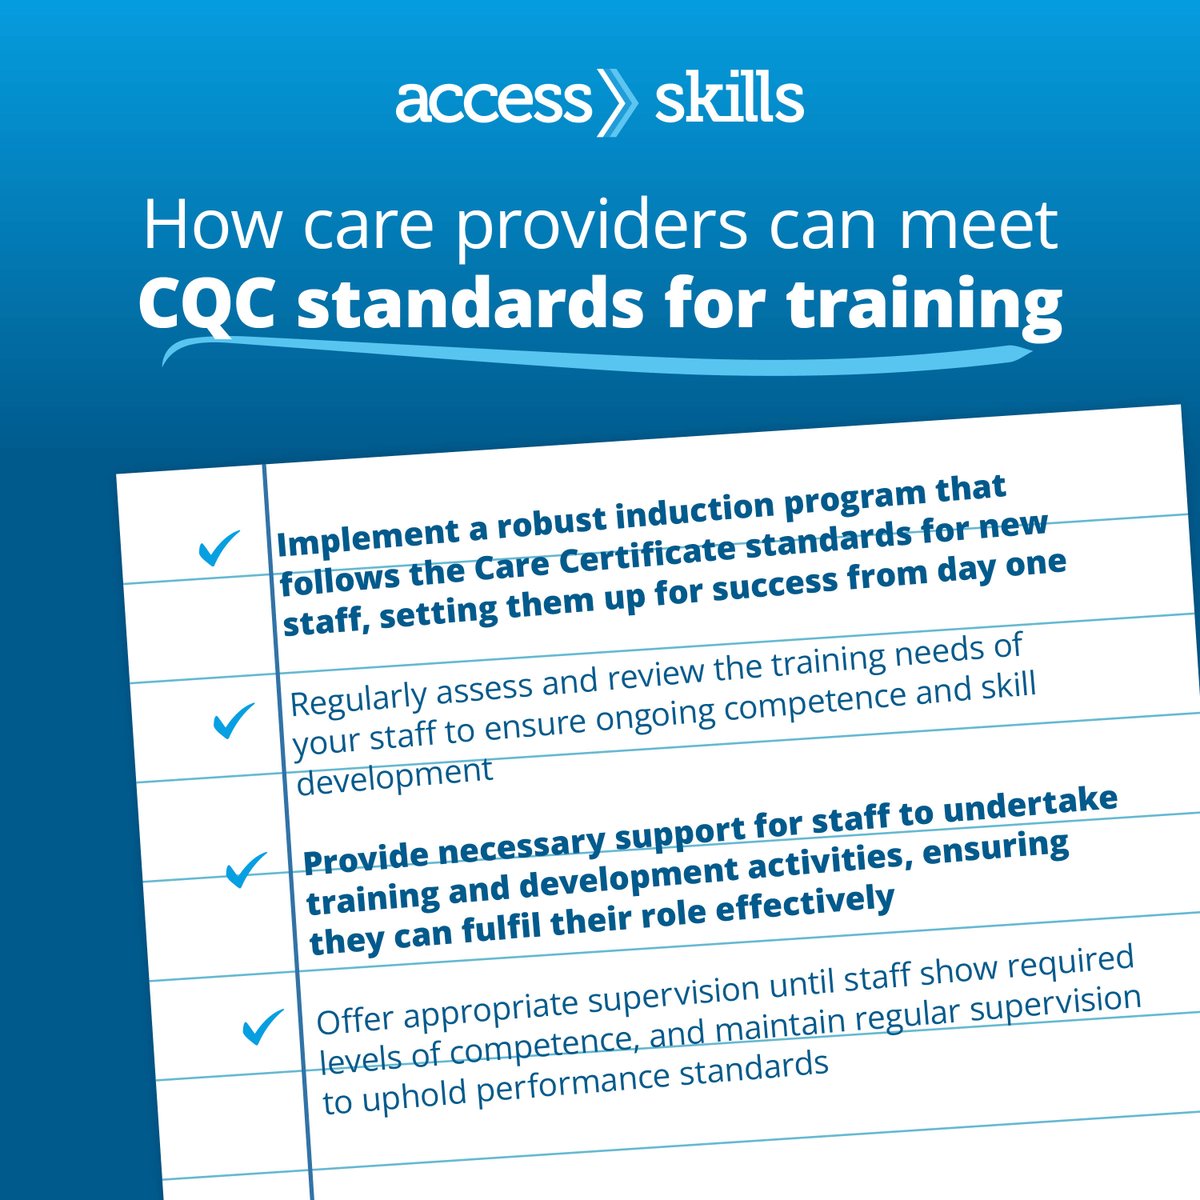 Is your care service meeting CQC's standards when it comes to training? Part 1!

Here's our top tips to make sure your team's training and development align with CQC expectations. Stay tuned for Part 2!

#cqc #socialcare #careprovider #carestandards